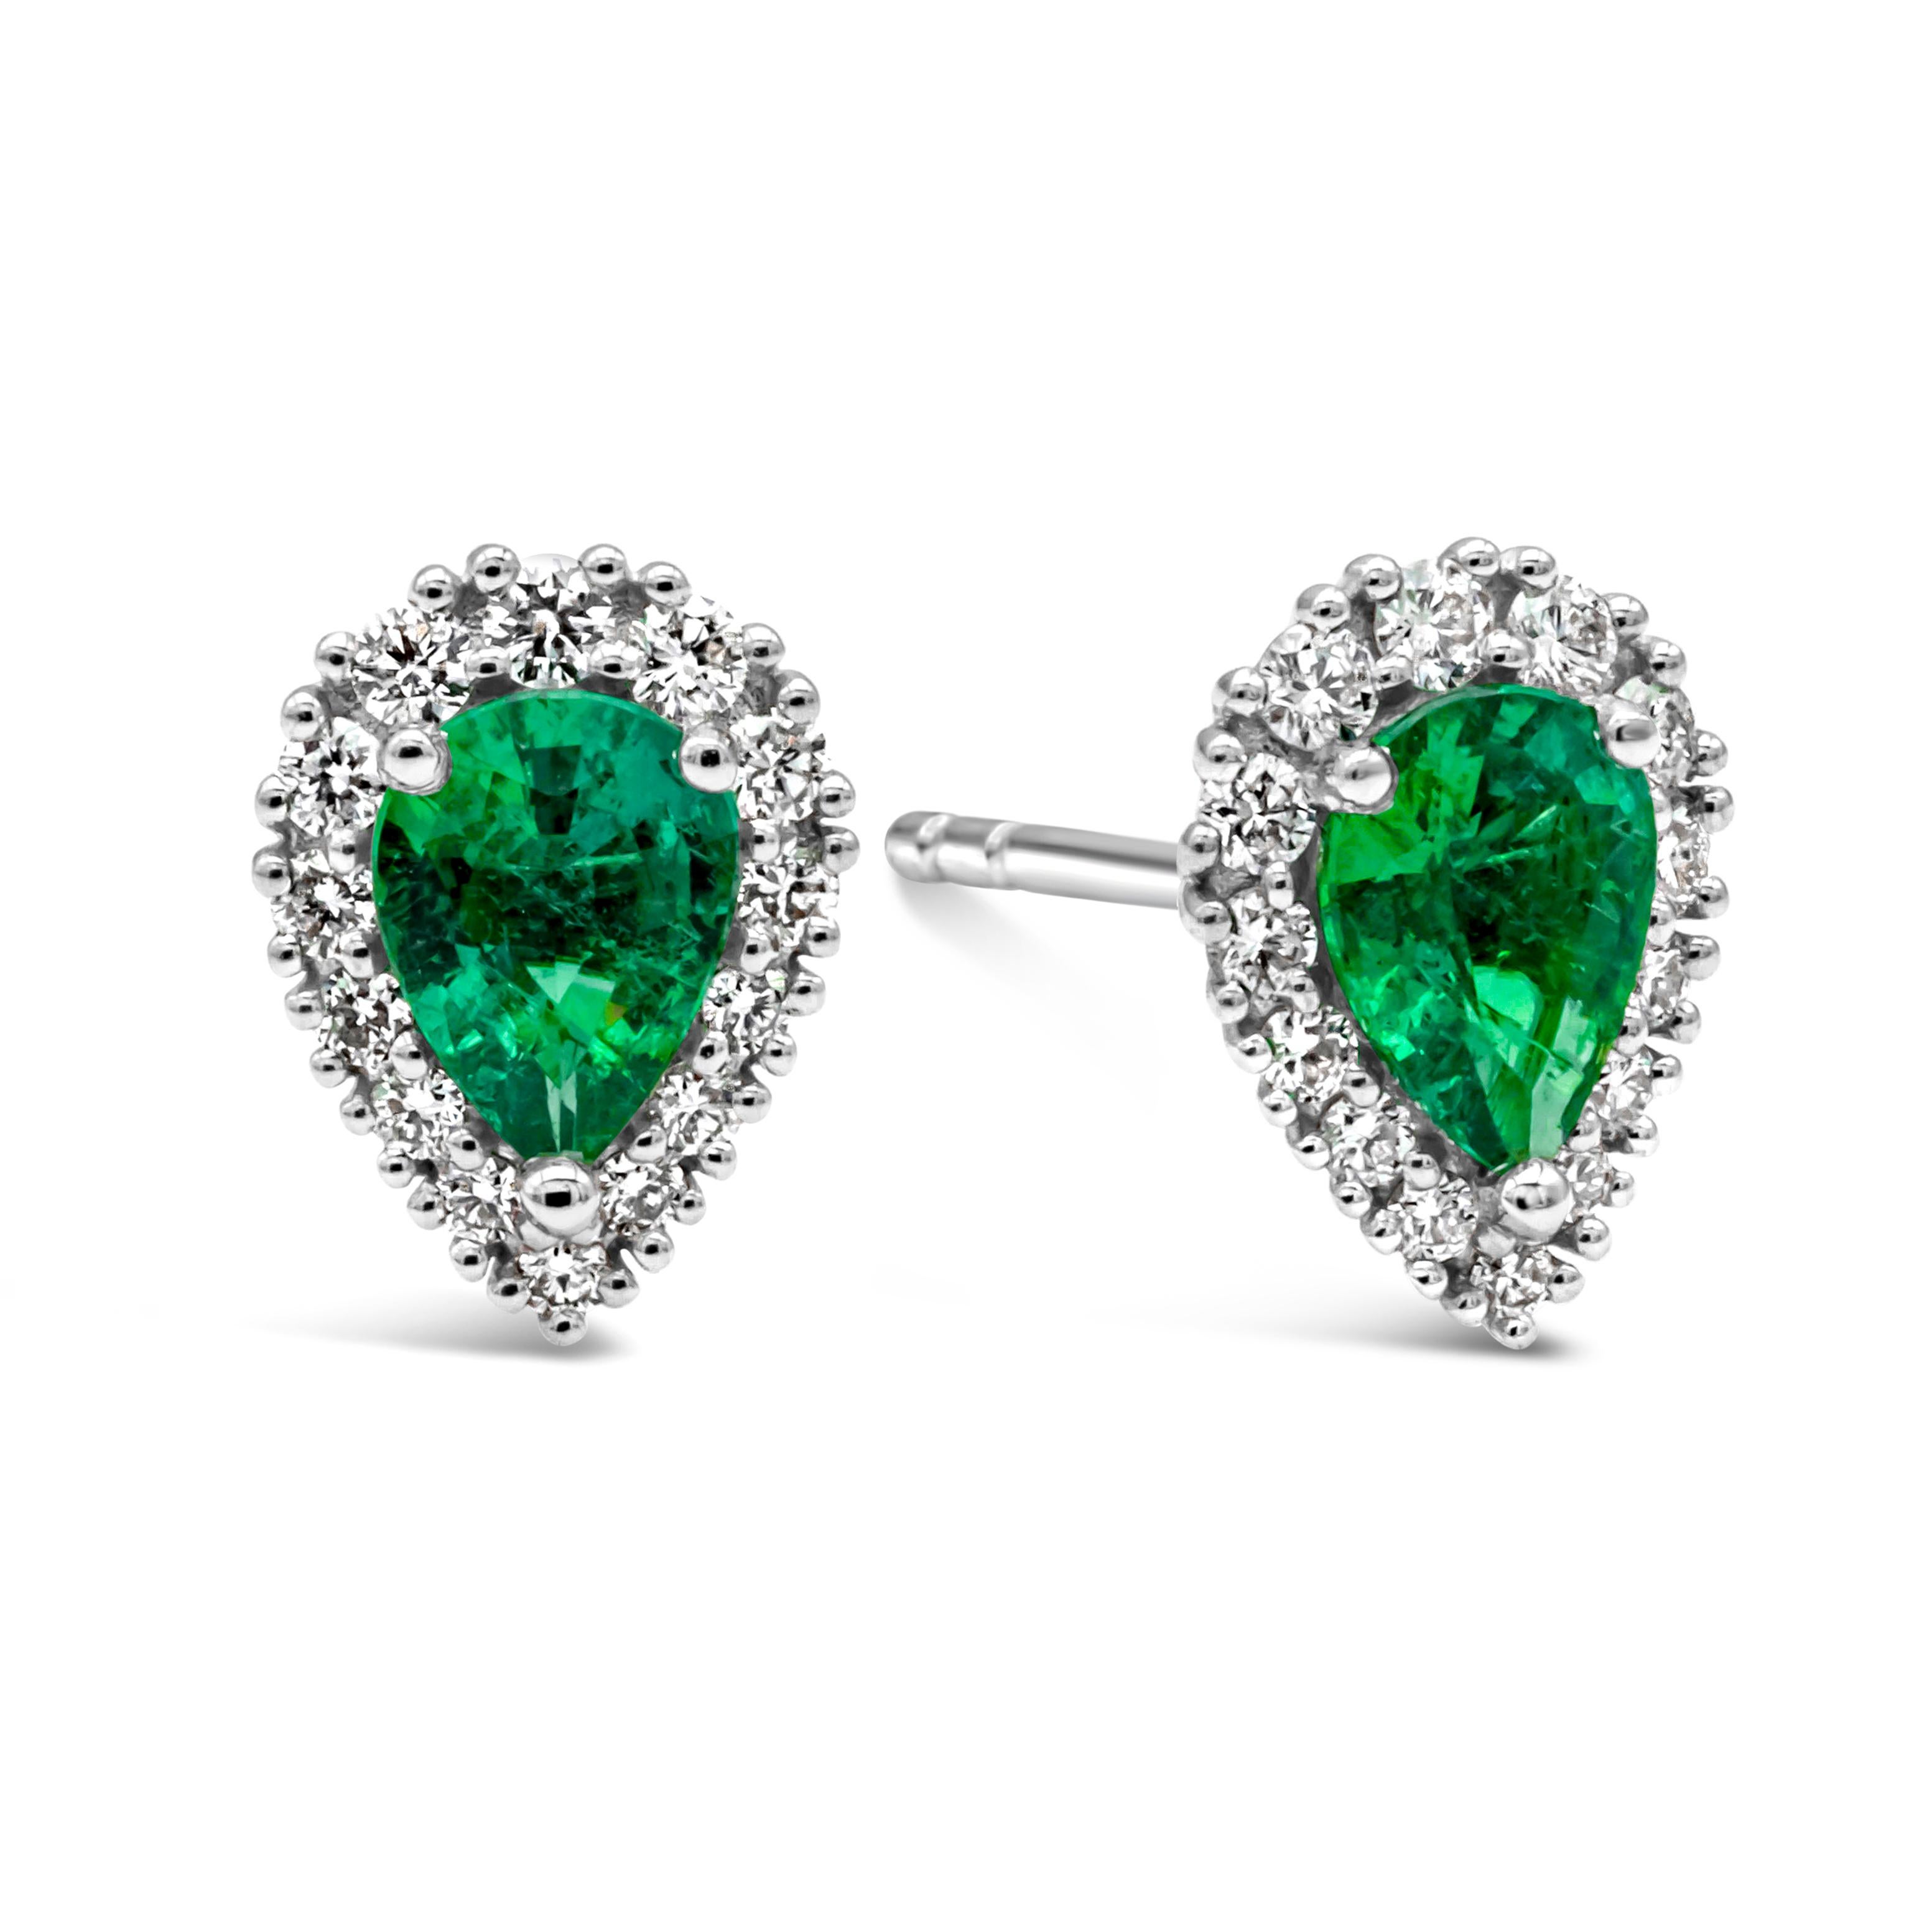 A simple and classic pair of stud earrings showcasing a pear shape Colombian green emerald weighing 0.63 carats total, set in a classic three prong setting. Surrounded by a single row of brilliant round shape diamond weighing 0.26 carats total, G